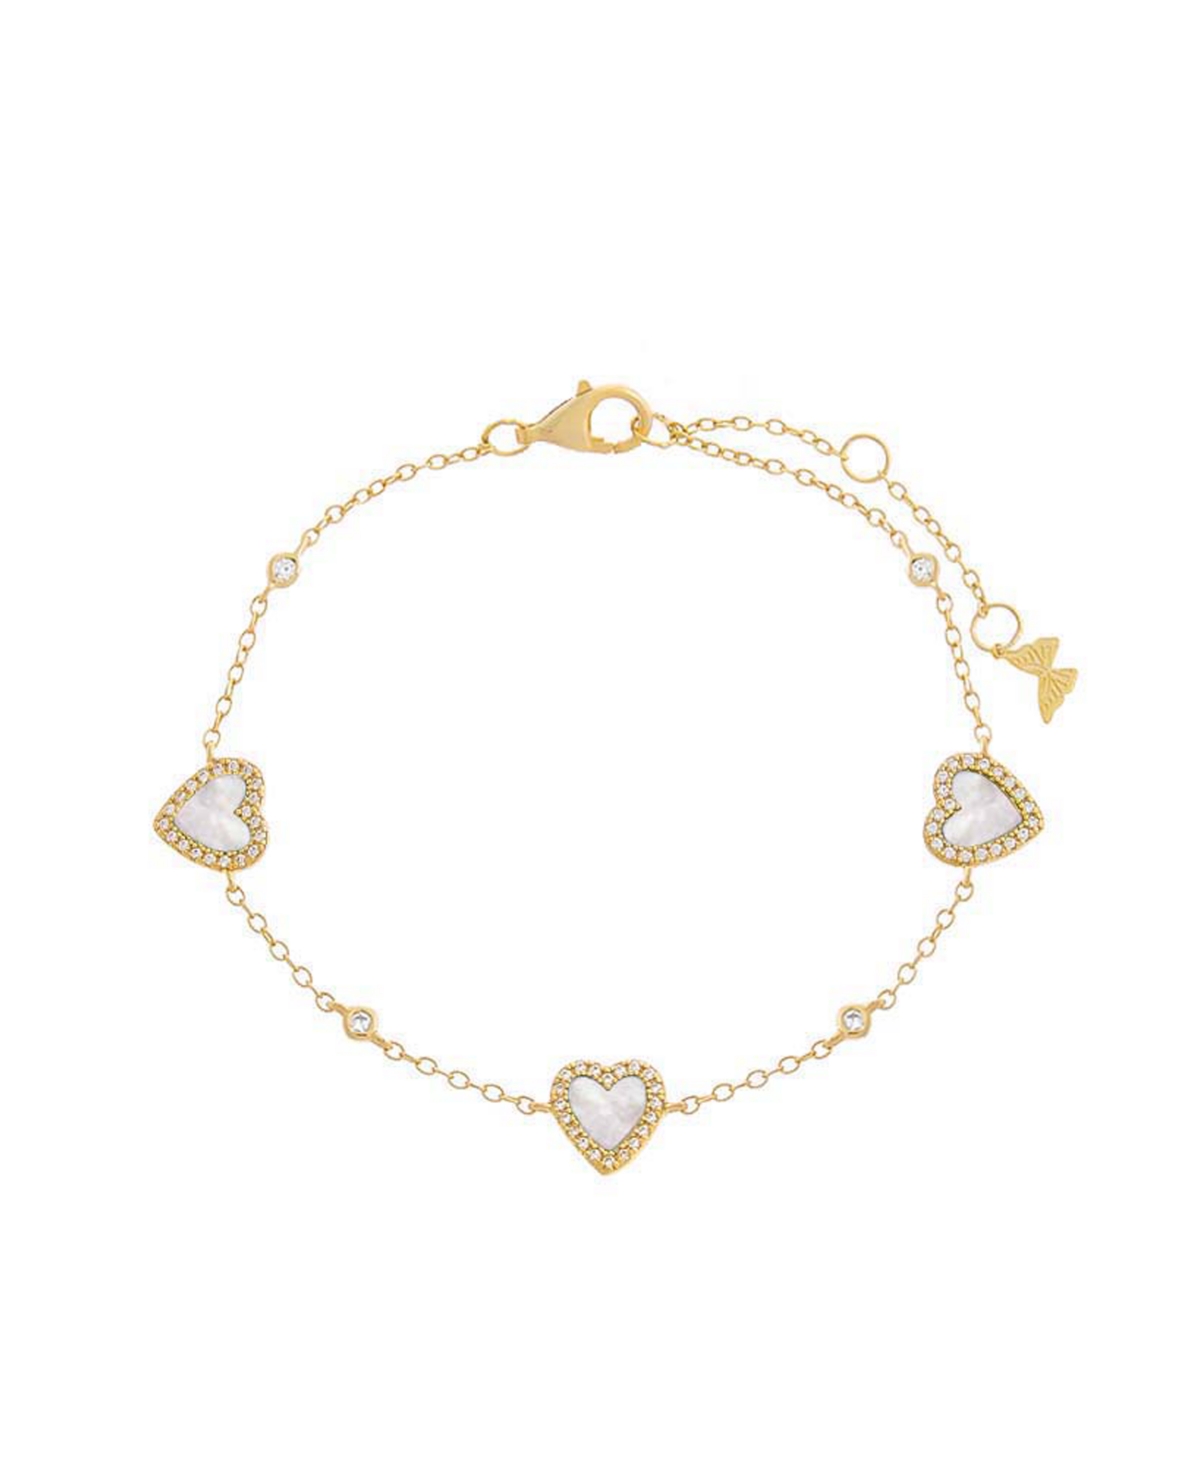 14k Gold-Plated Sterling Silver Mother of Pearl & Cubic Zirconia Heart Link Bracelet - Turquoise